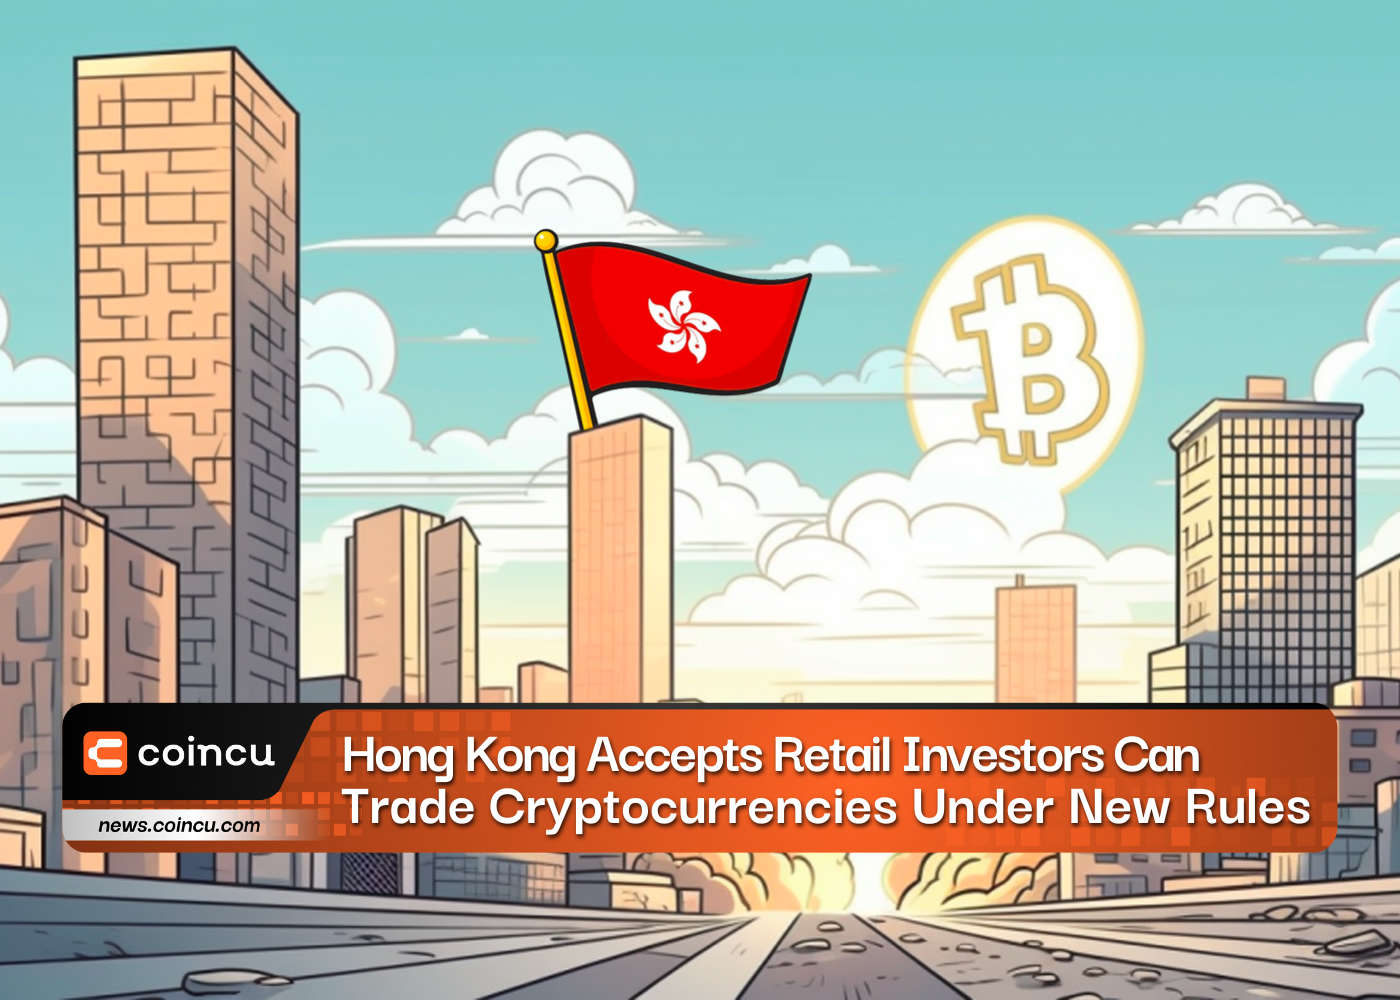 Hong Kong Accepts Retail Investors Can Trade Cryptocurrencies Under New Rules